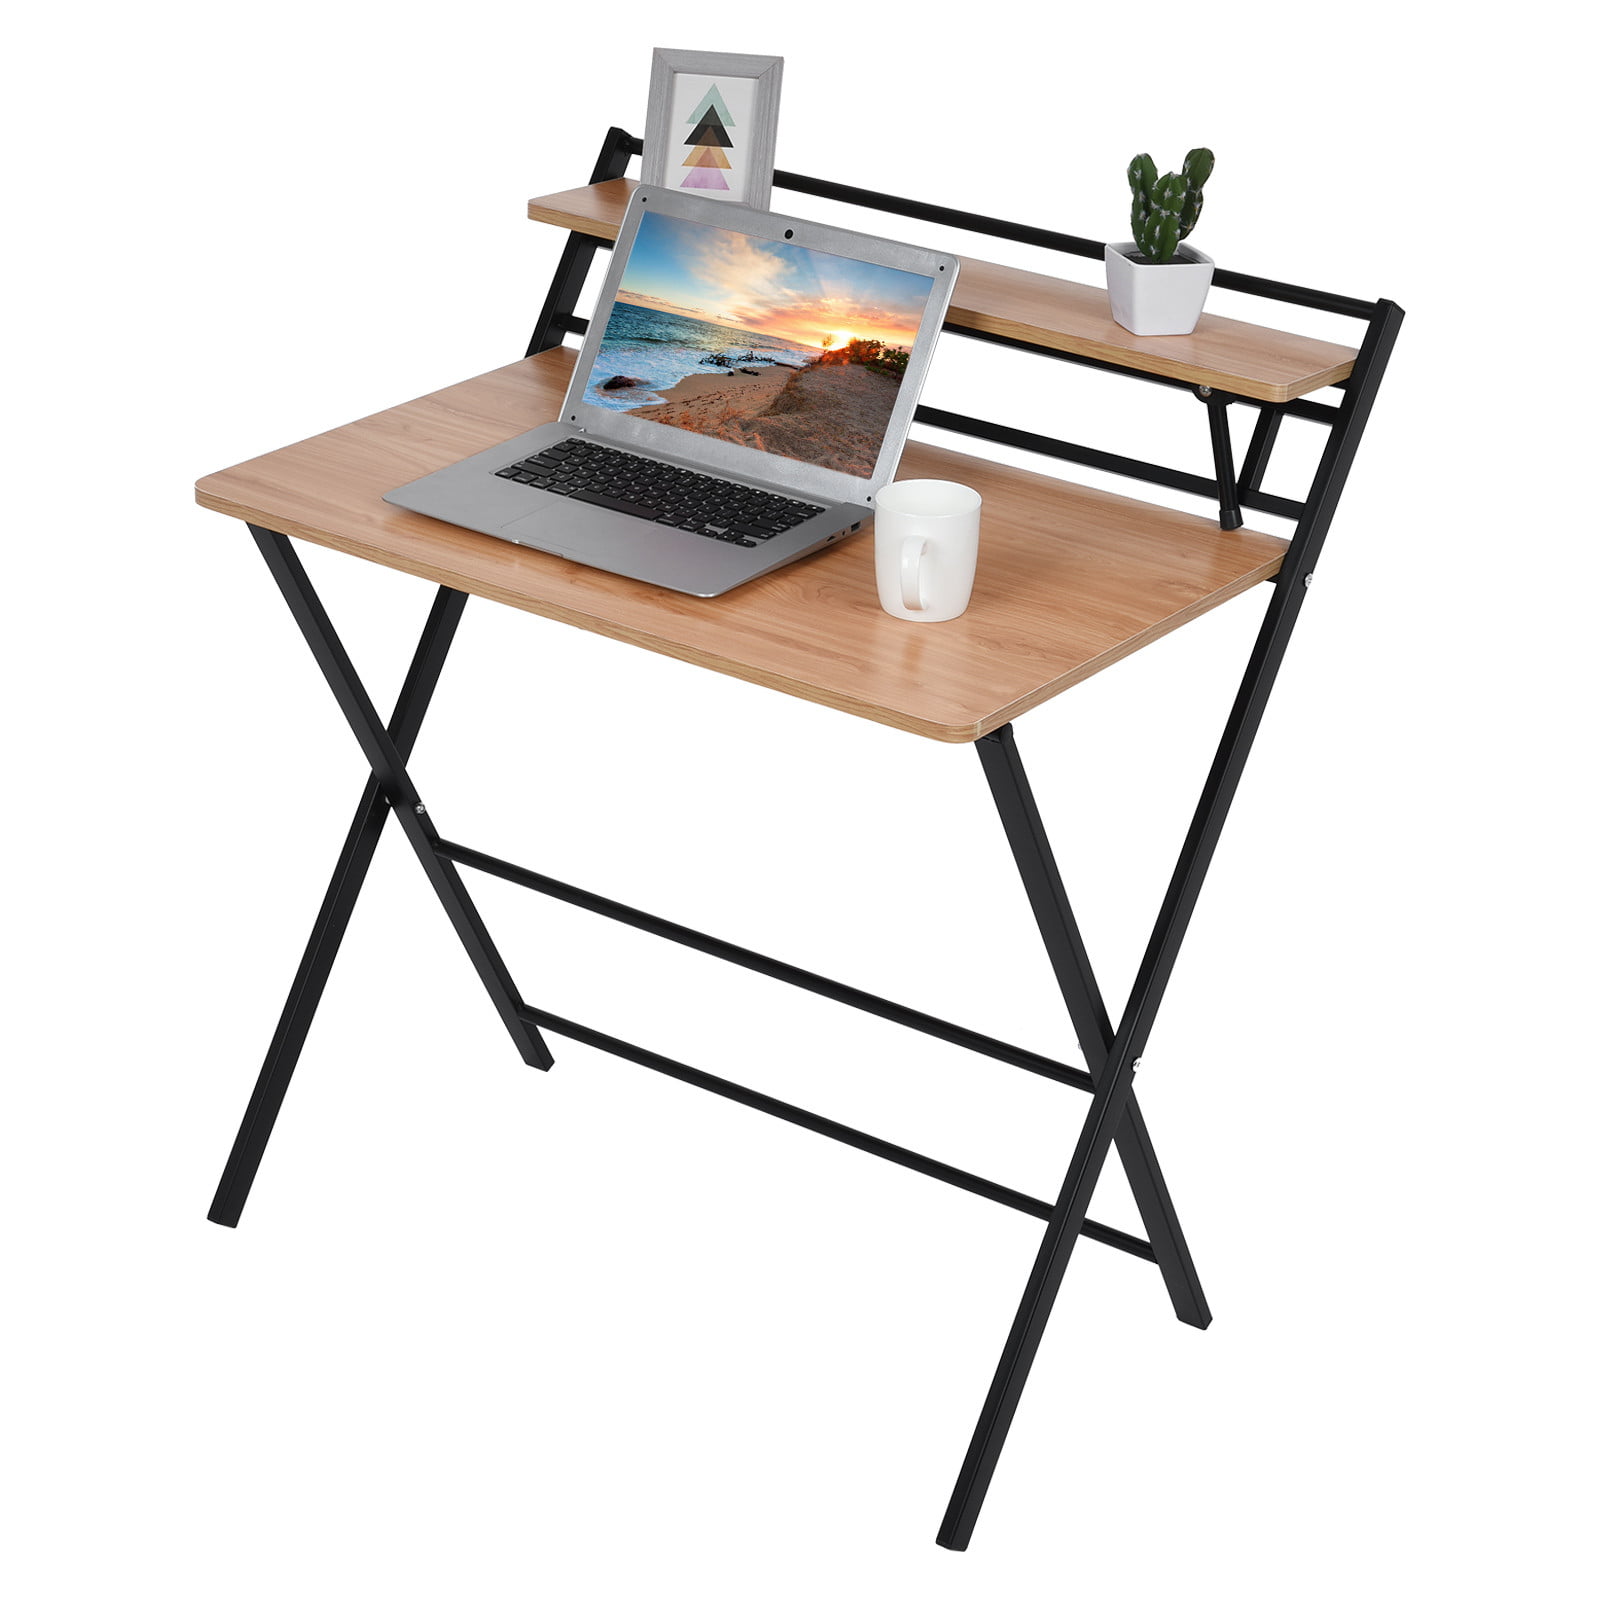 Details about   47.2'' Computer Desk PC Table w/Shelf Study Workstation Home Office Black Friday 